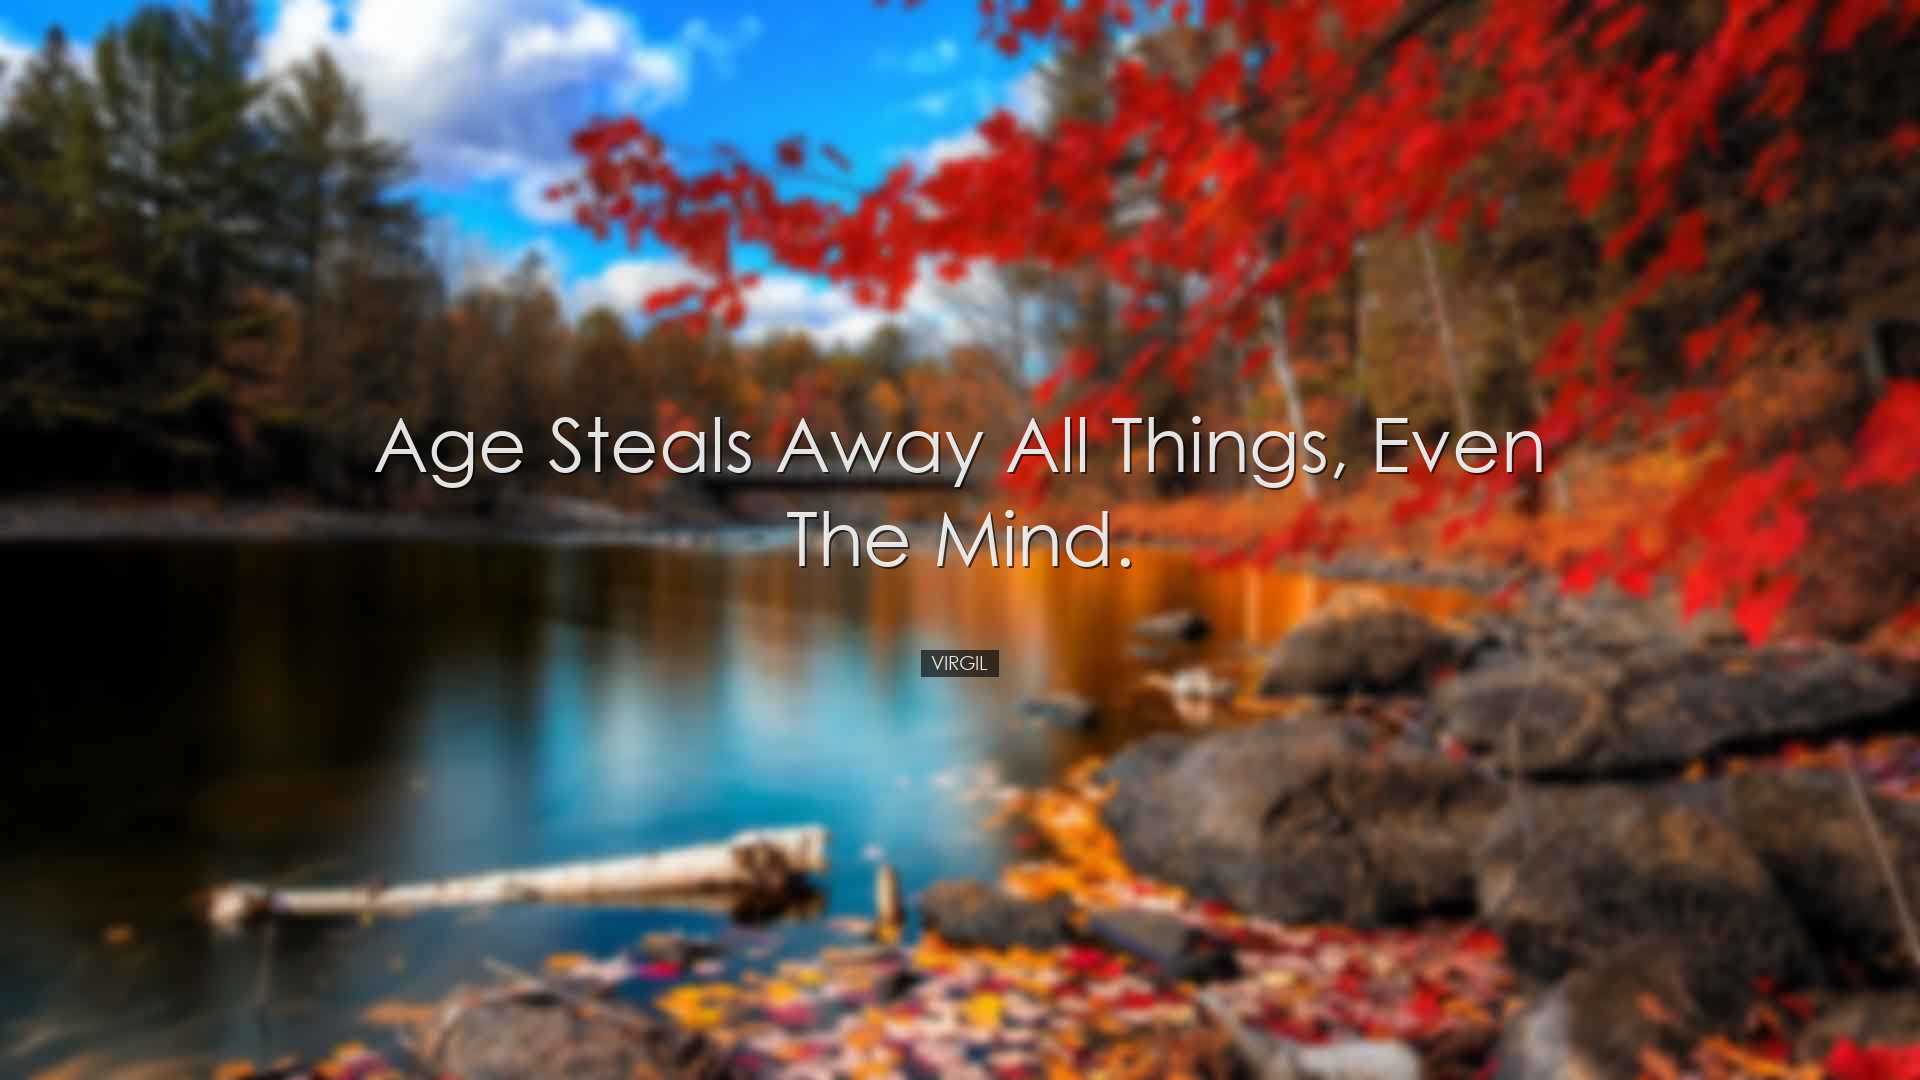 Age steals away all things, even the mind. - Virgil